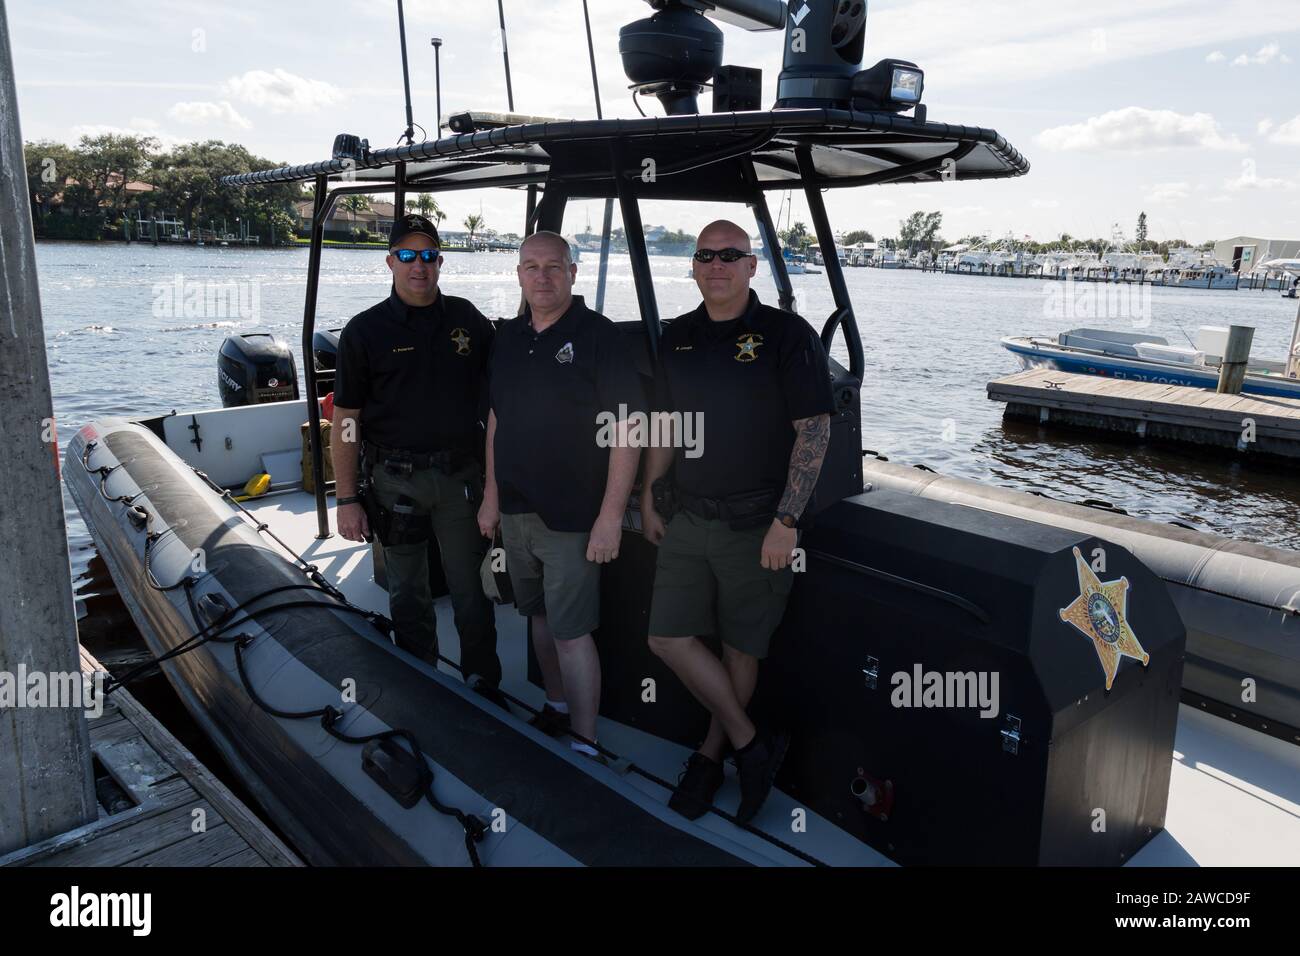 Deputies Michael Joseph and Pete Peterson pose with a tourist on the Manatee Pocket at Sandsprit Park in Port Salerno, Florida, USA. Stock Photo